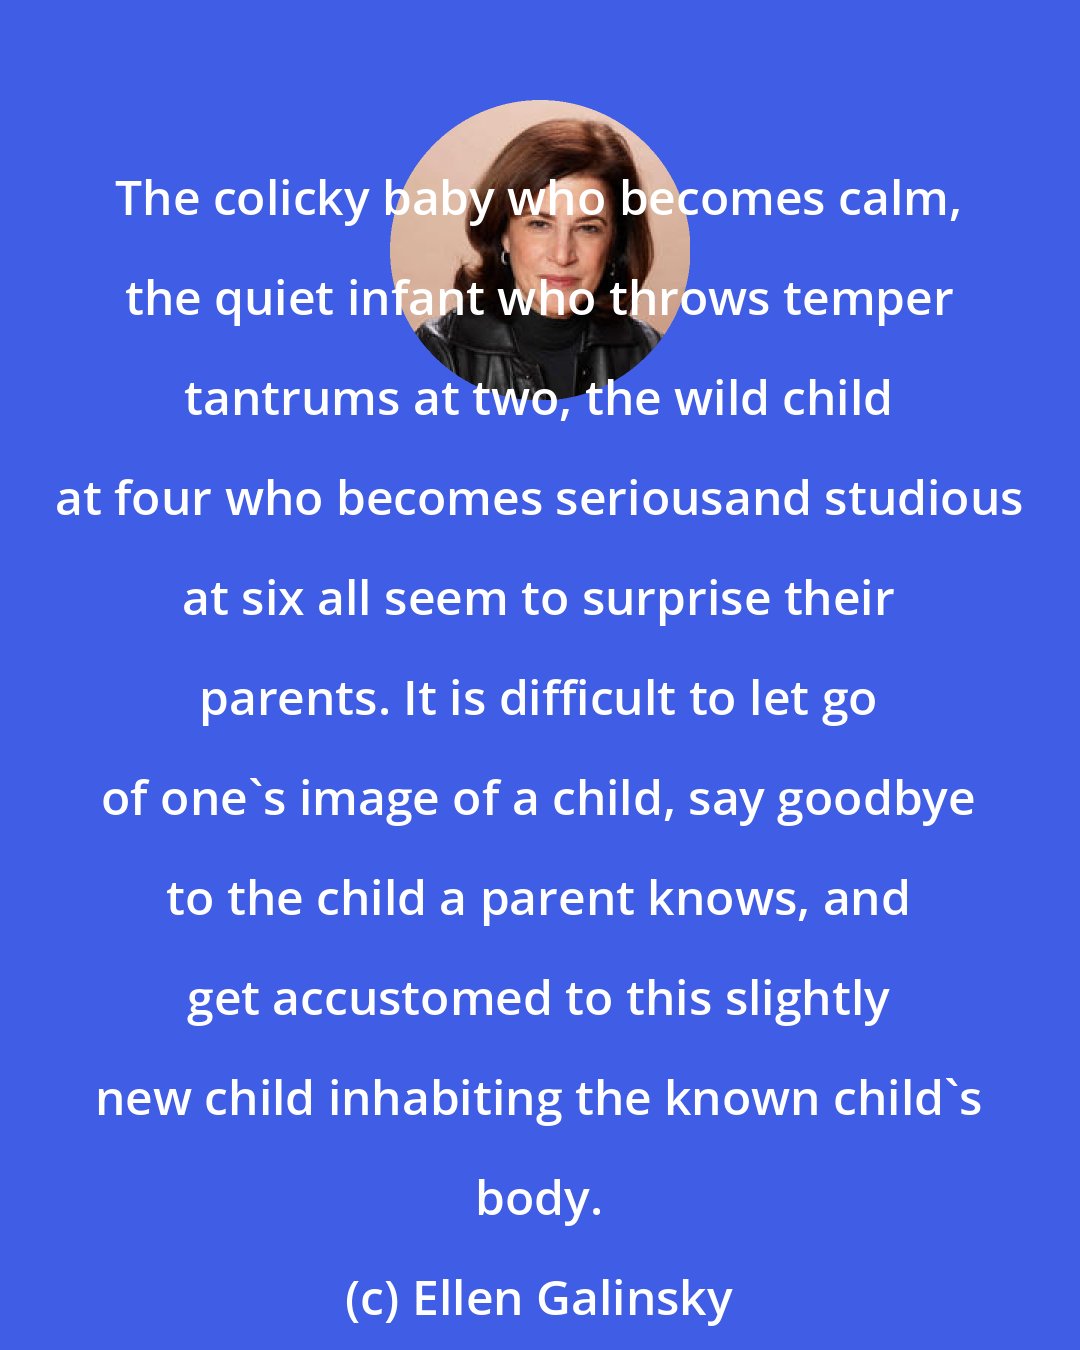 Ellen Galinsky: The colicky baby who becomes calm, the quiet infant who throws temper tantrums at two, the wild child at four who becomes seriousand studious at six all seem to surprise their parents. It is difficult to let go of one's image of a child, say goodbye to the child a parent knows, and get accustomed to this slightly new child inhabiting the known child's body.